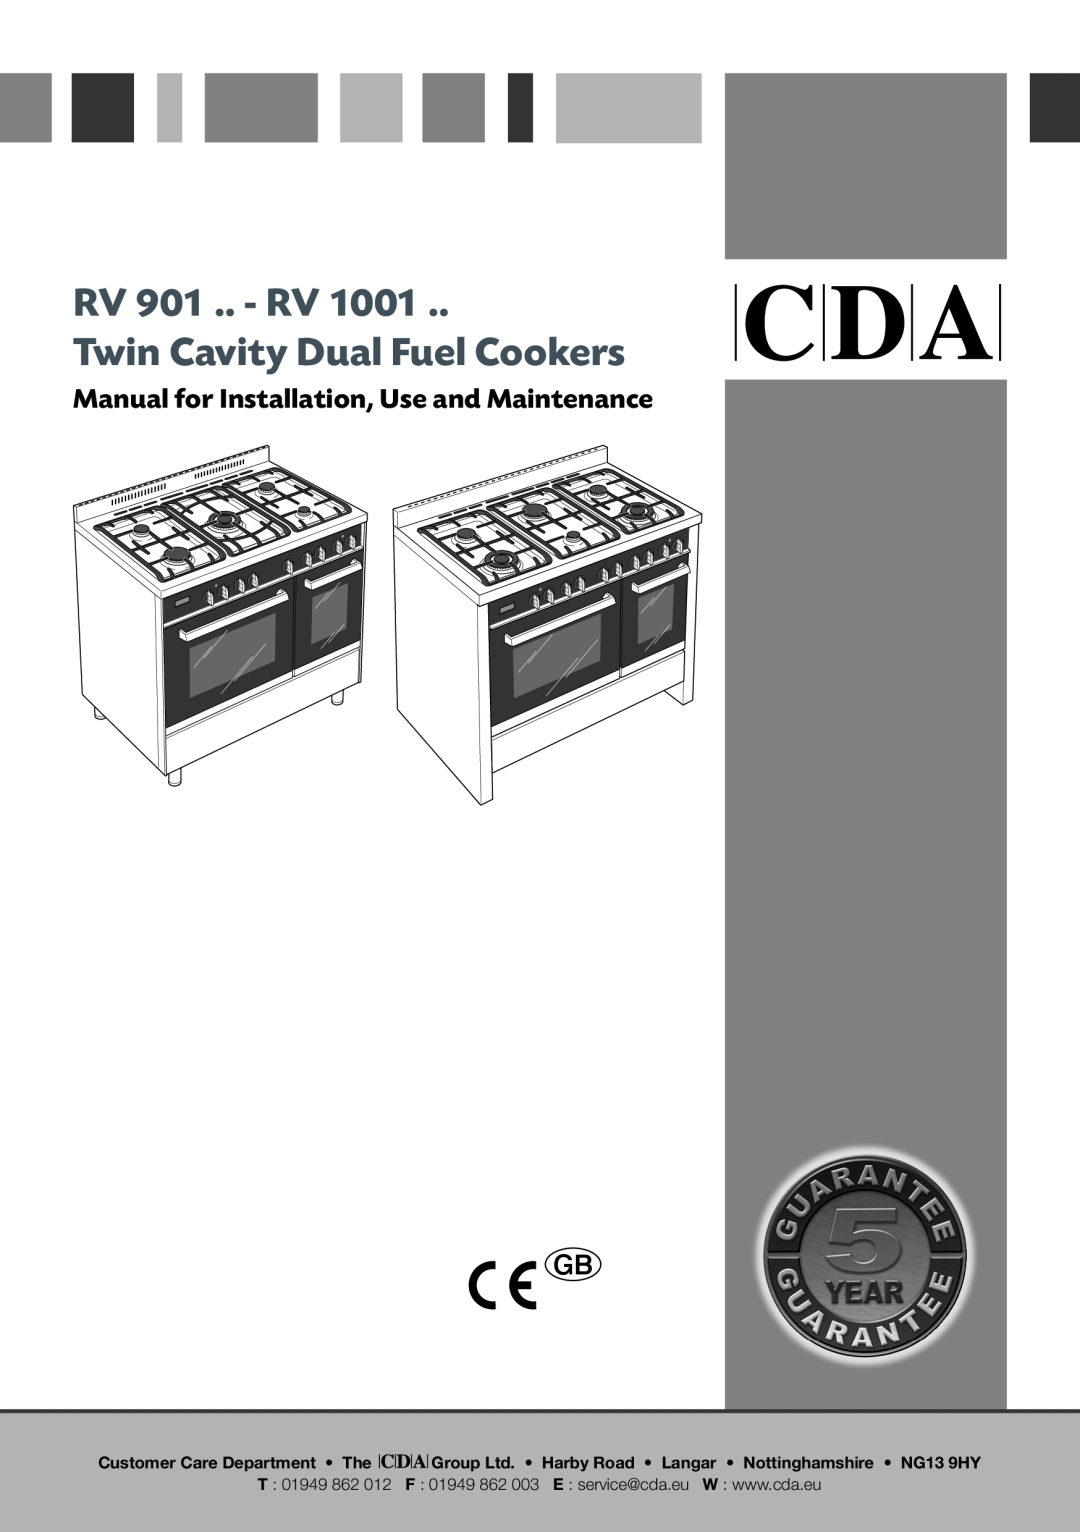 CDA RV 1001 manual RV 901 .. - RV Twin Cavity Dual Fuel Cookers, Manual for Installation, Use and Maintenance 